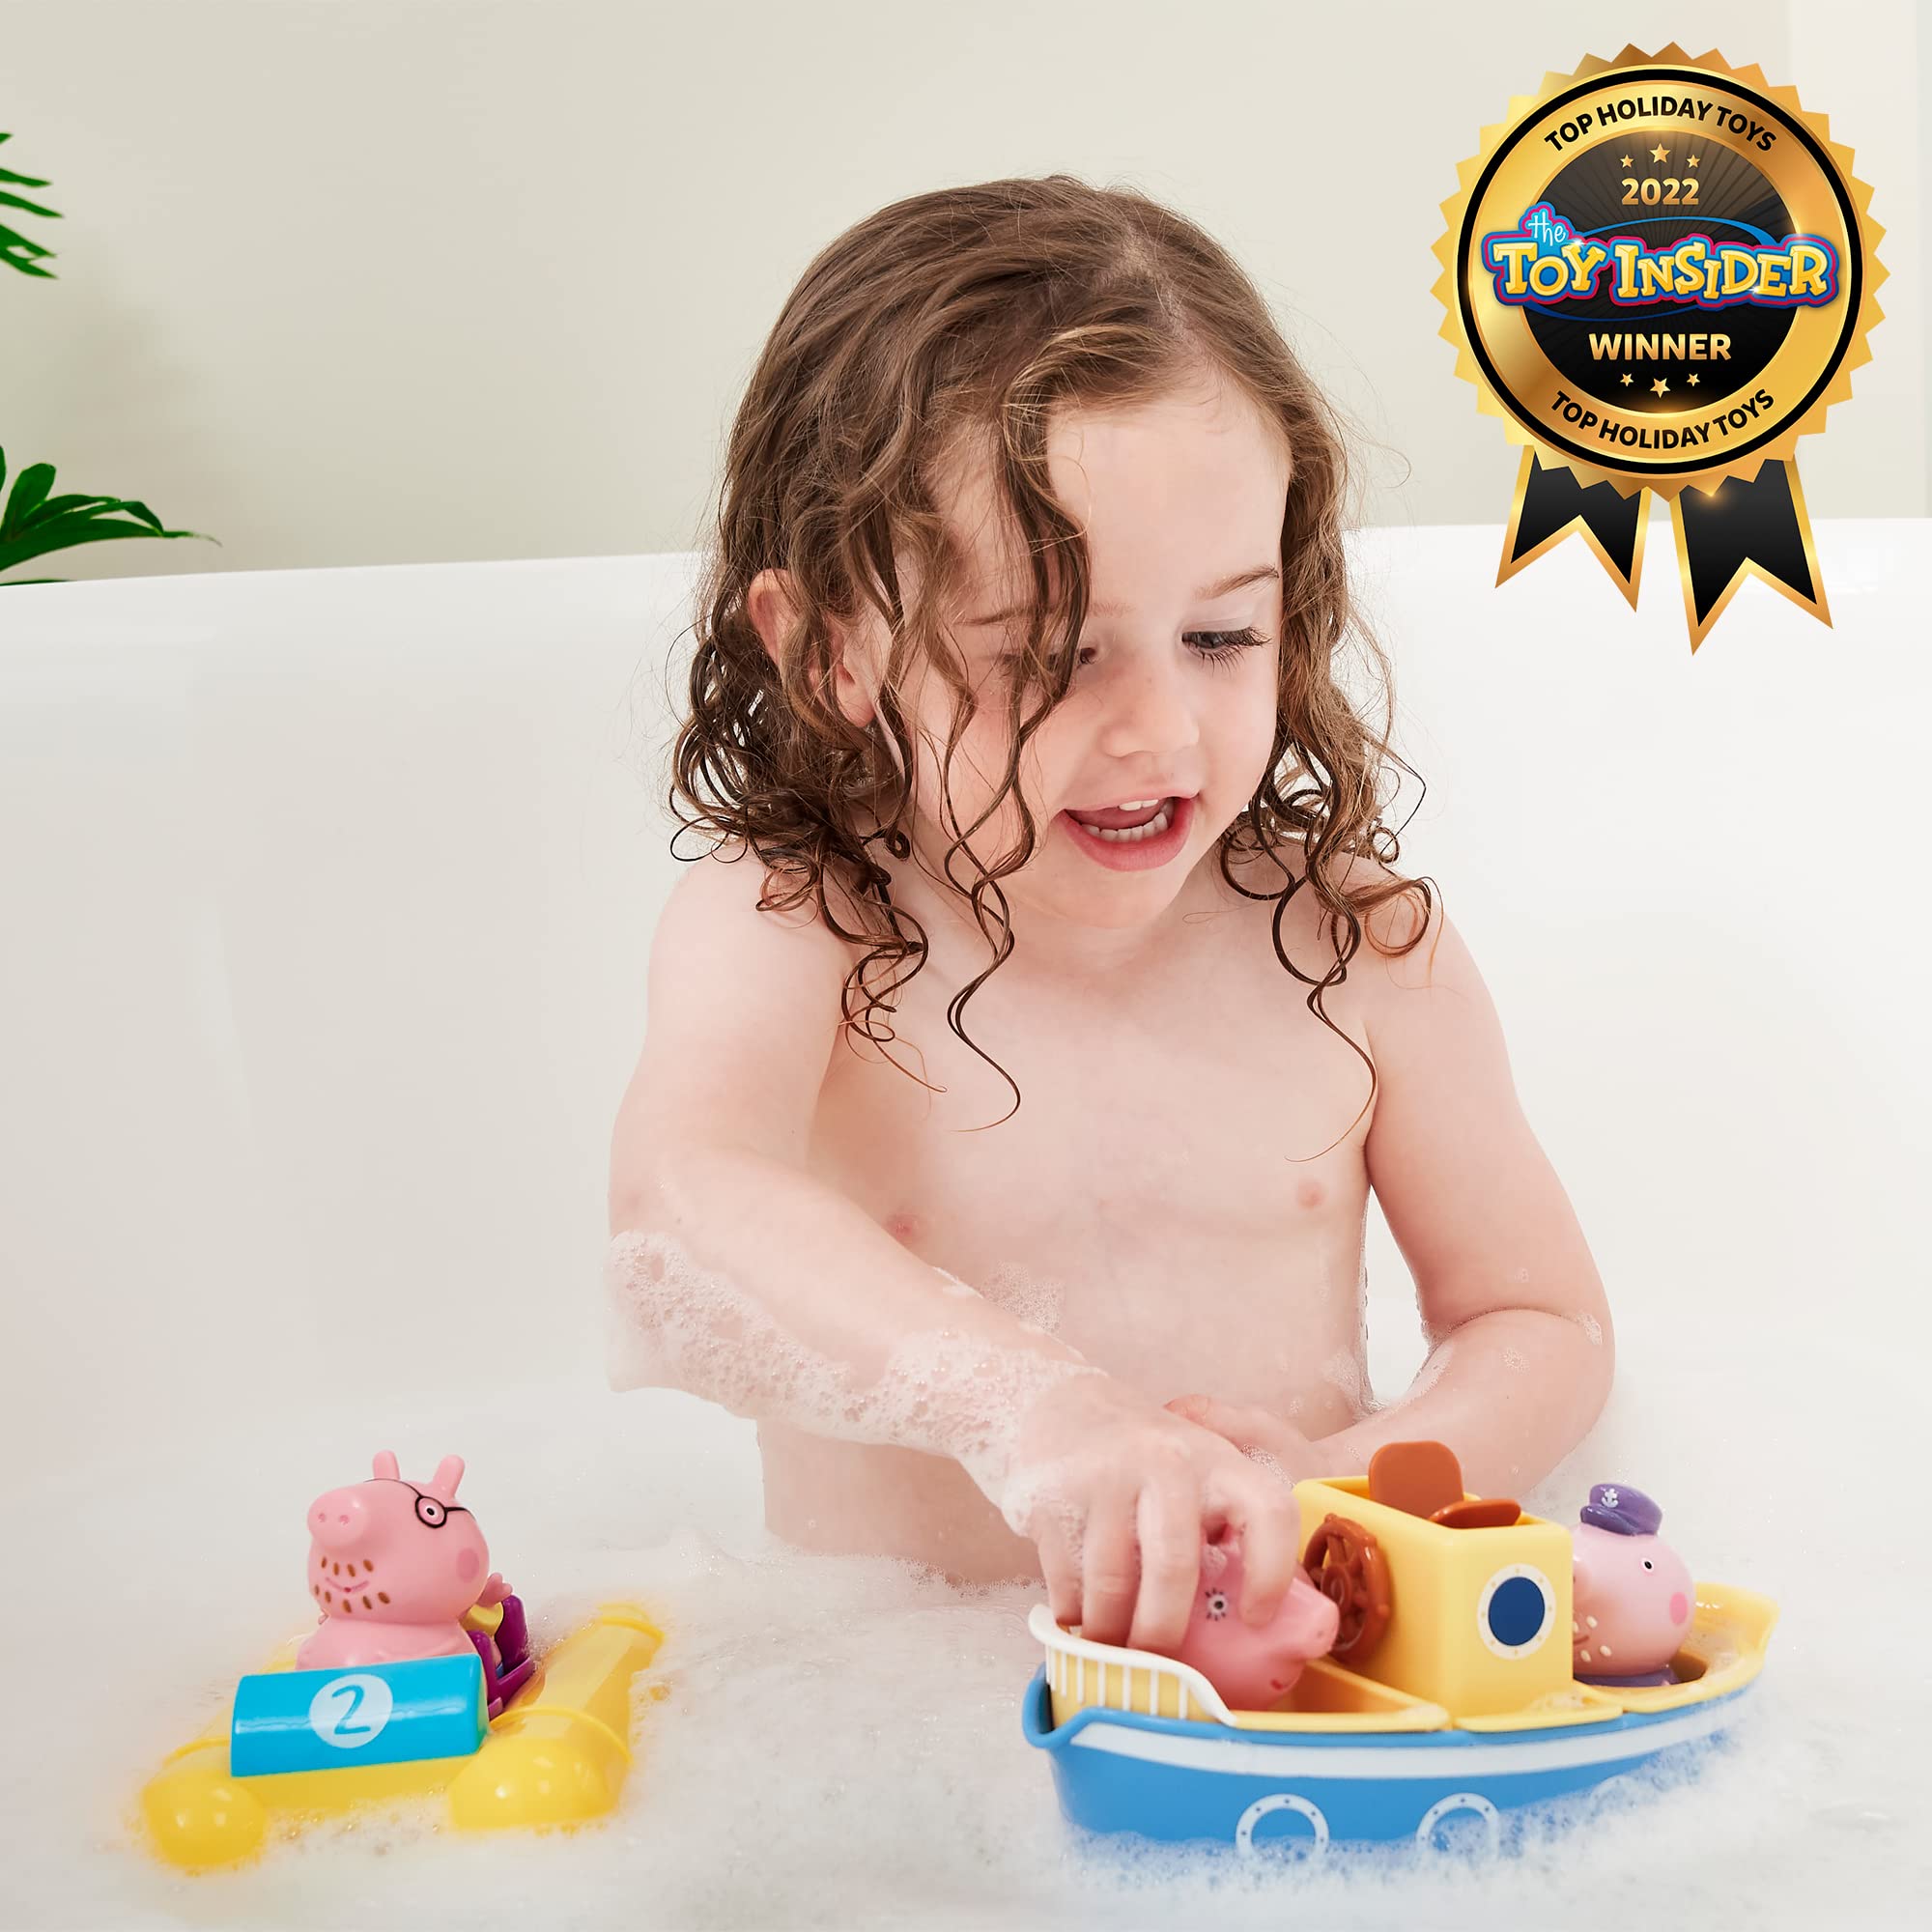 TOMY Toomies Peppa Pig Bath Toys — Peppa’s Boat Adventure Bath Toy Set — Includes Two Boats and 5 Peppa Pig Toy Figures — Baby and Toddler Bath Toys for 18 Months and Up